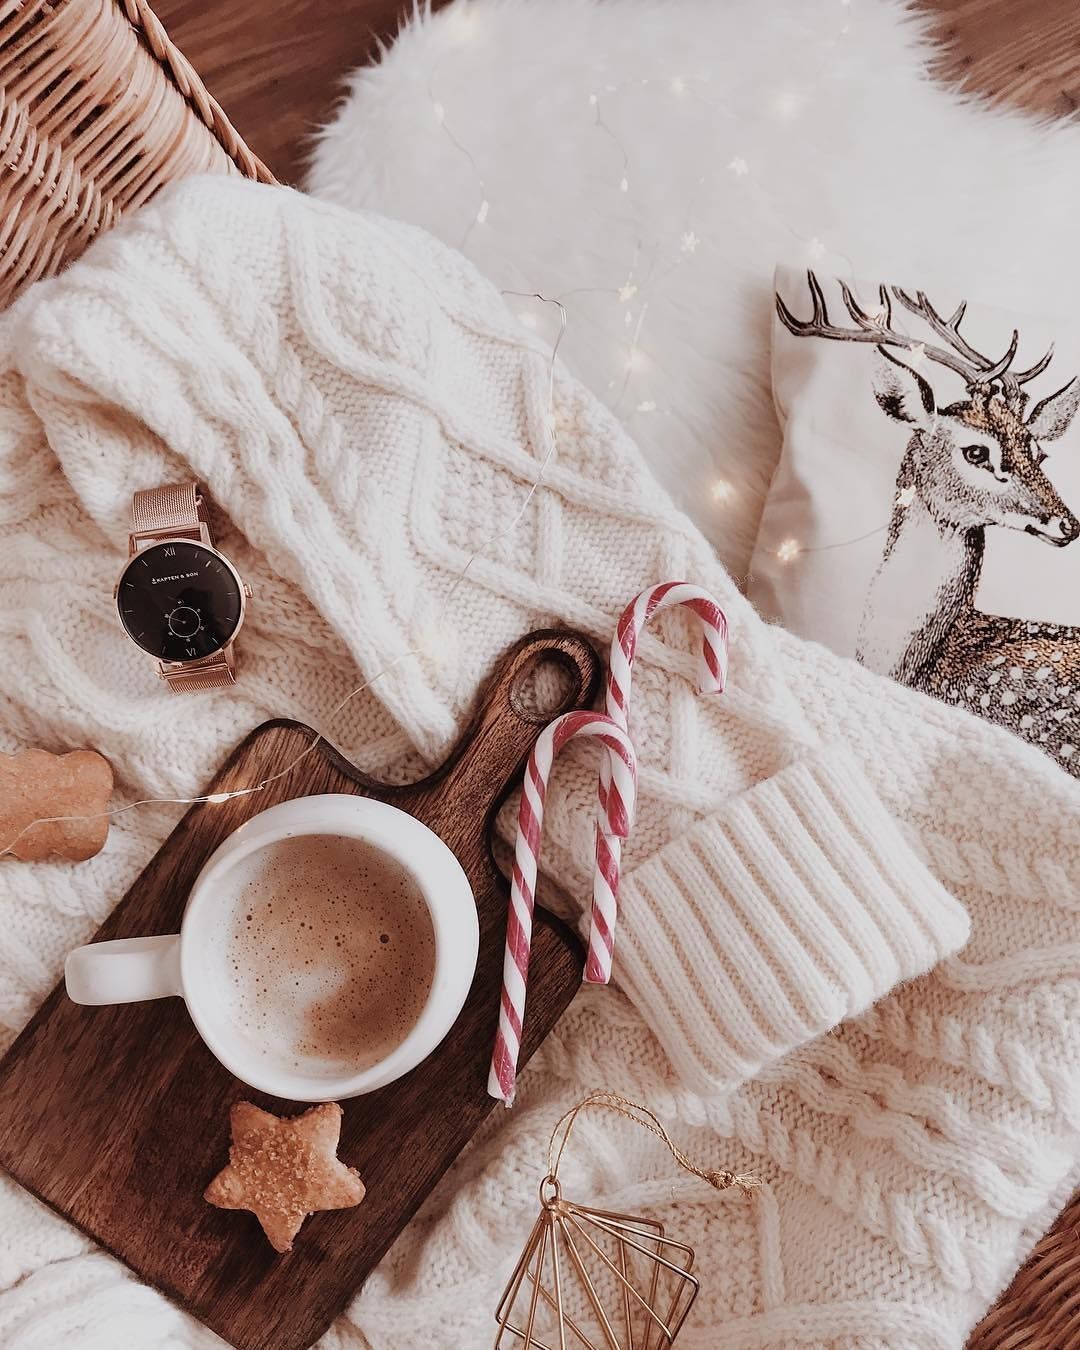 A cup of coffee on a wooden tray with a candy cane and a reindeer pillow. - Cozy